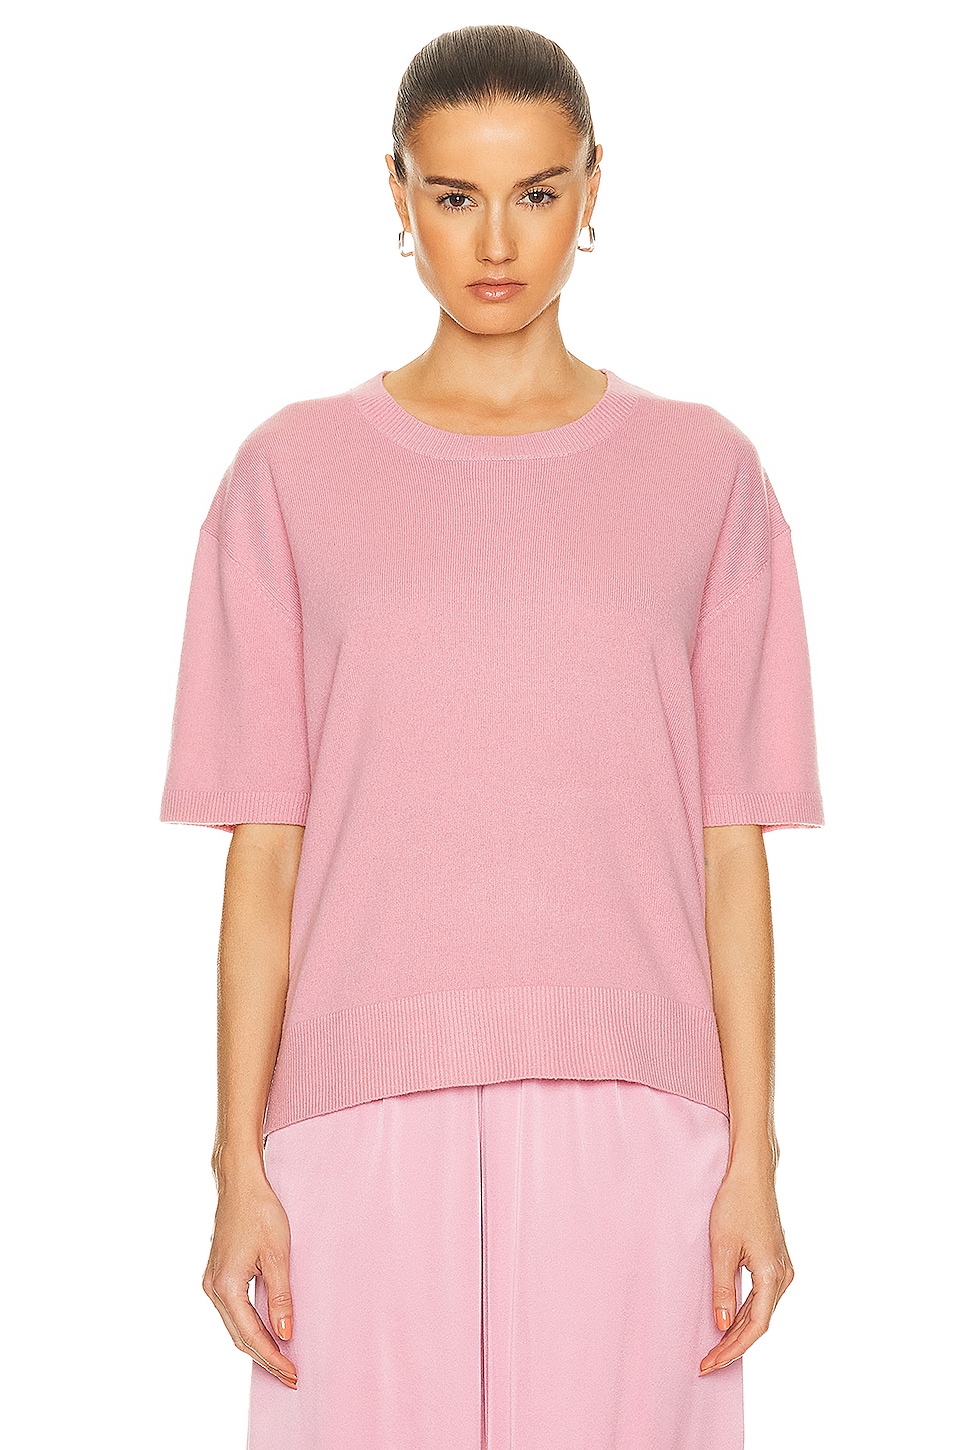 Image 1 of SABLYN Miller Cashmere Top in Lola